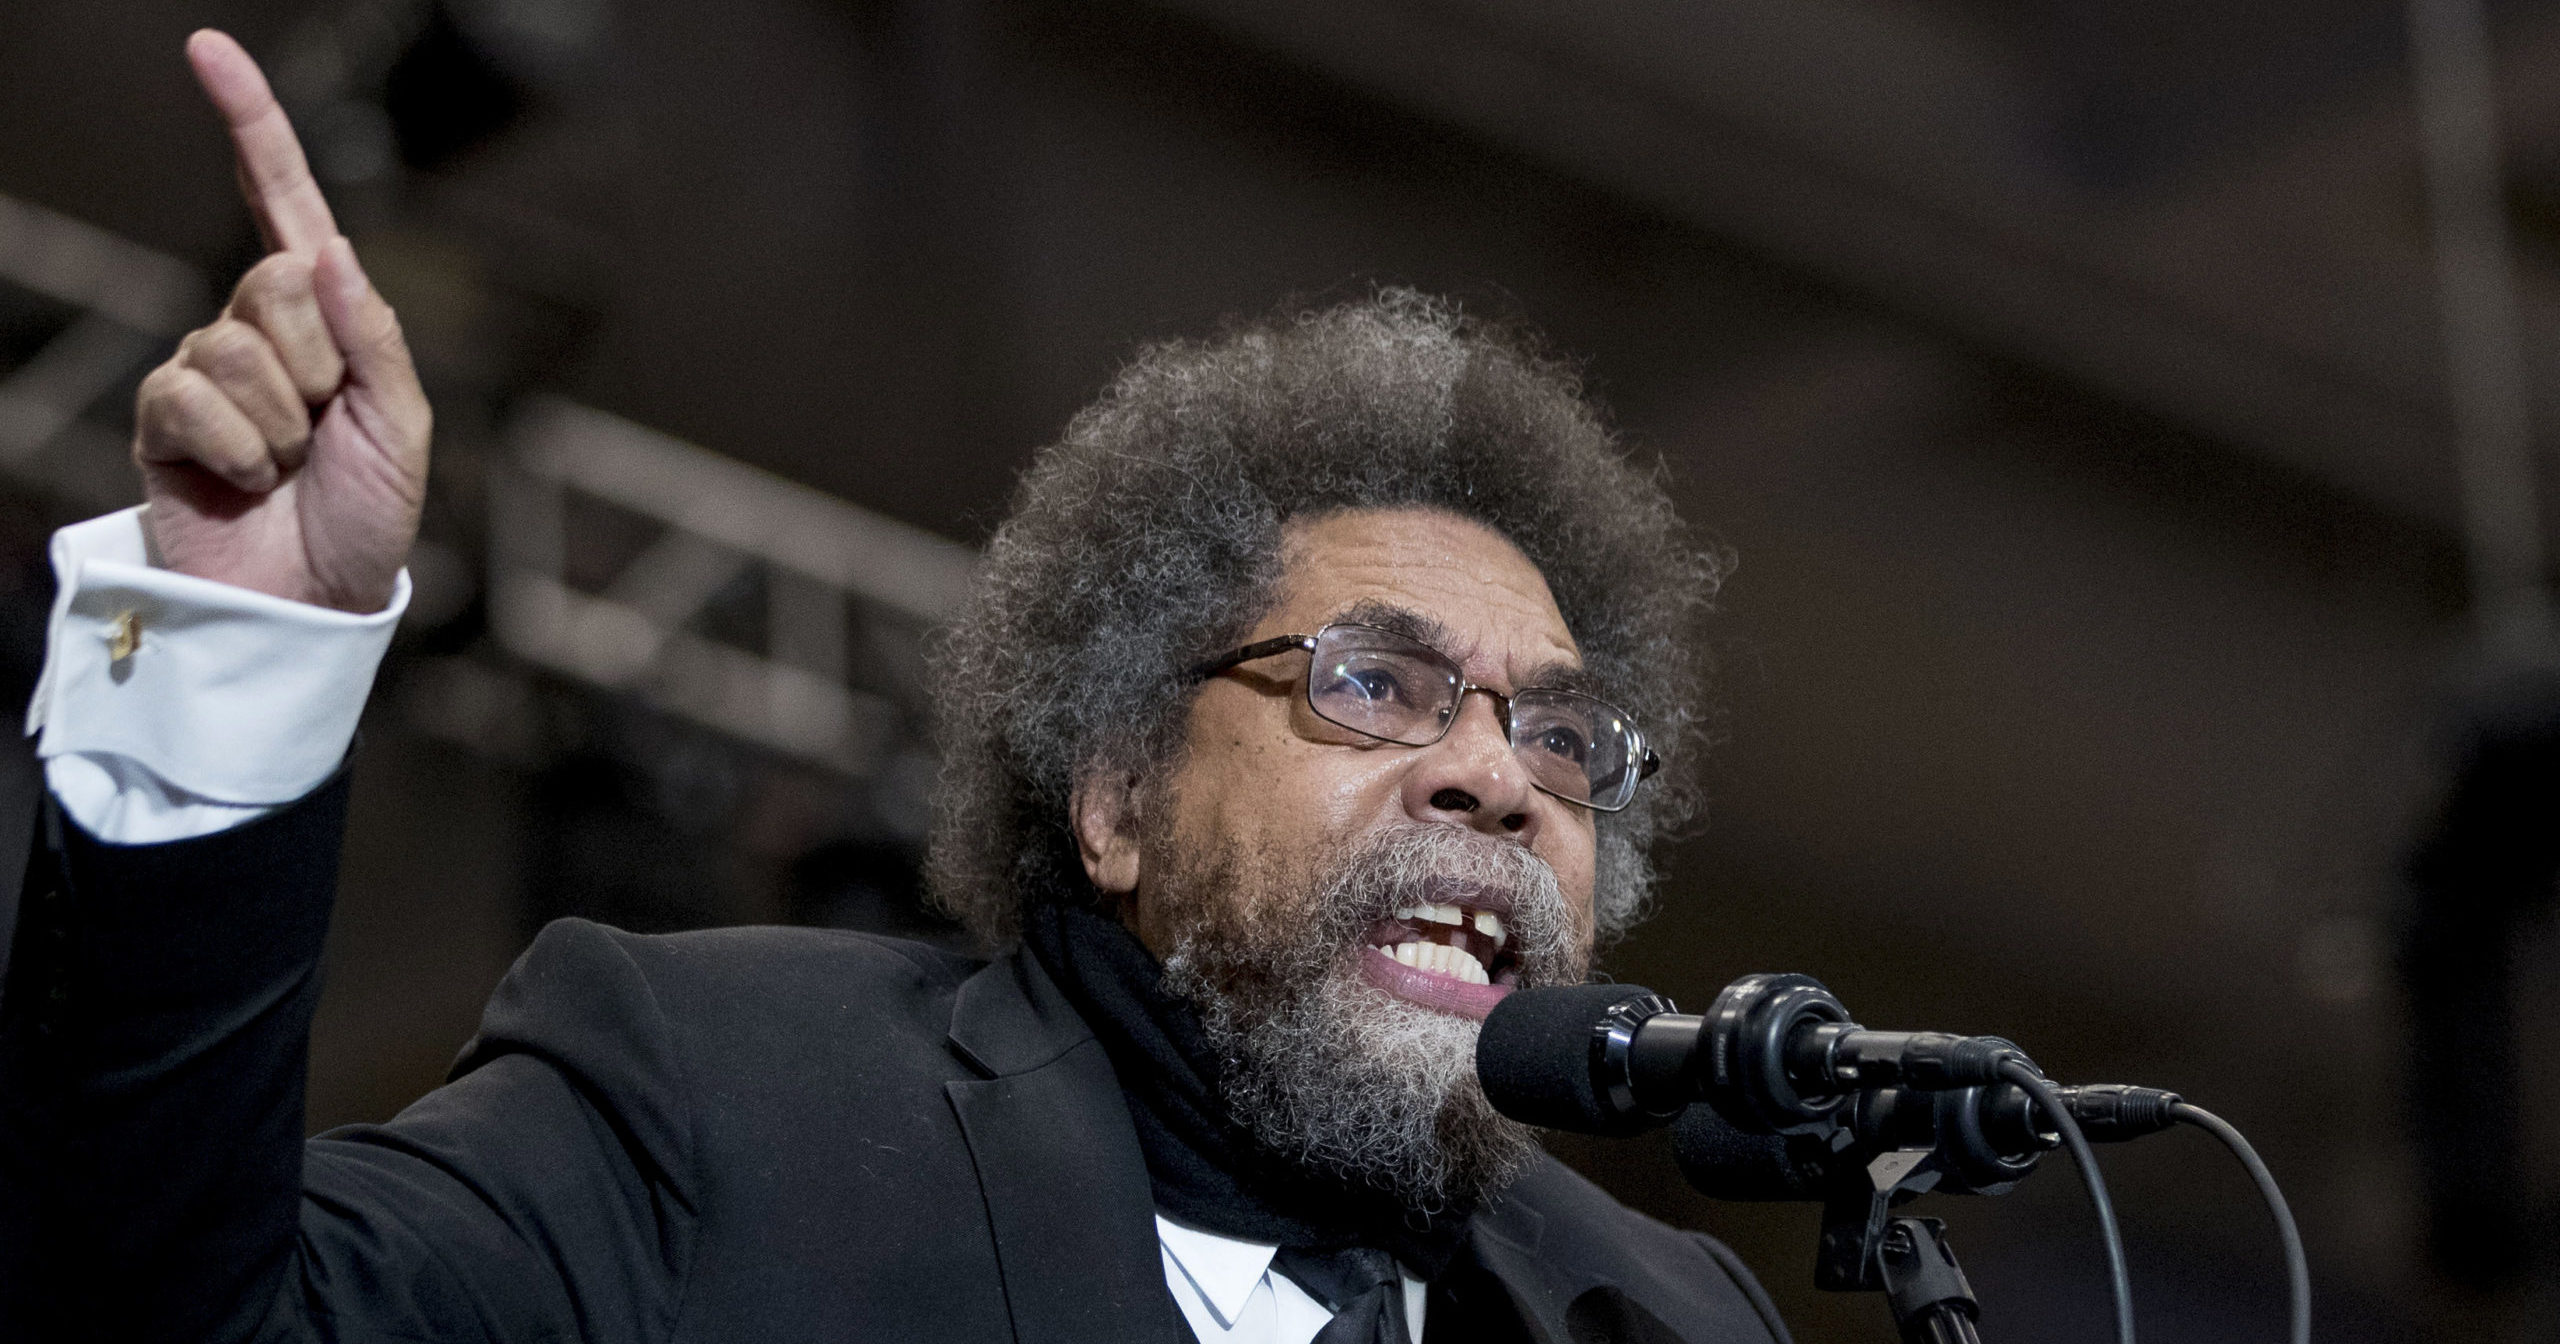 Cornel West speaks at a campaign rally for Democratic presidential candidate Sen. Bernie Sanders of Vermont at the Whittemore Center Arena at the University of New Hampshire in Durham on Feb. 10, 2020.